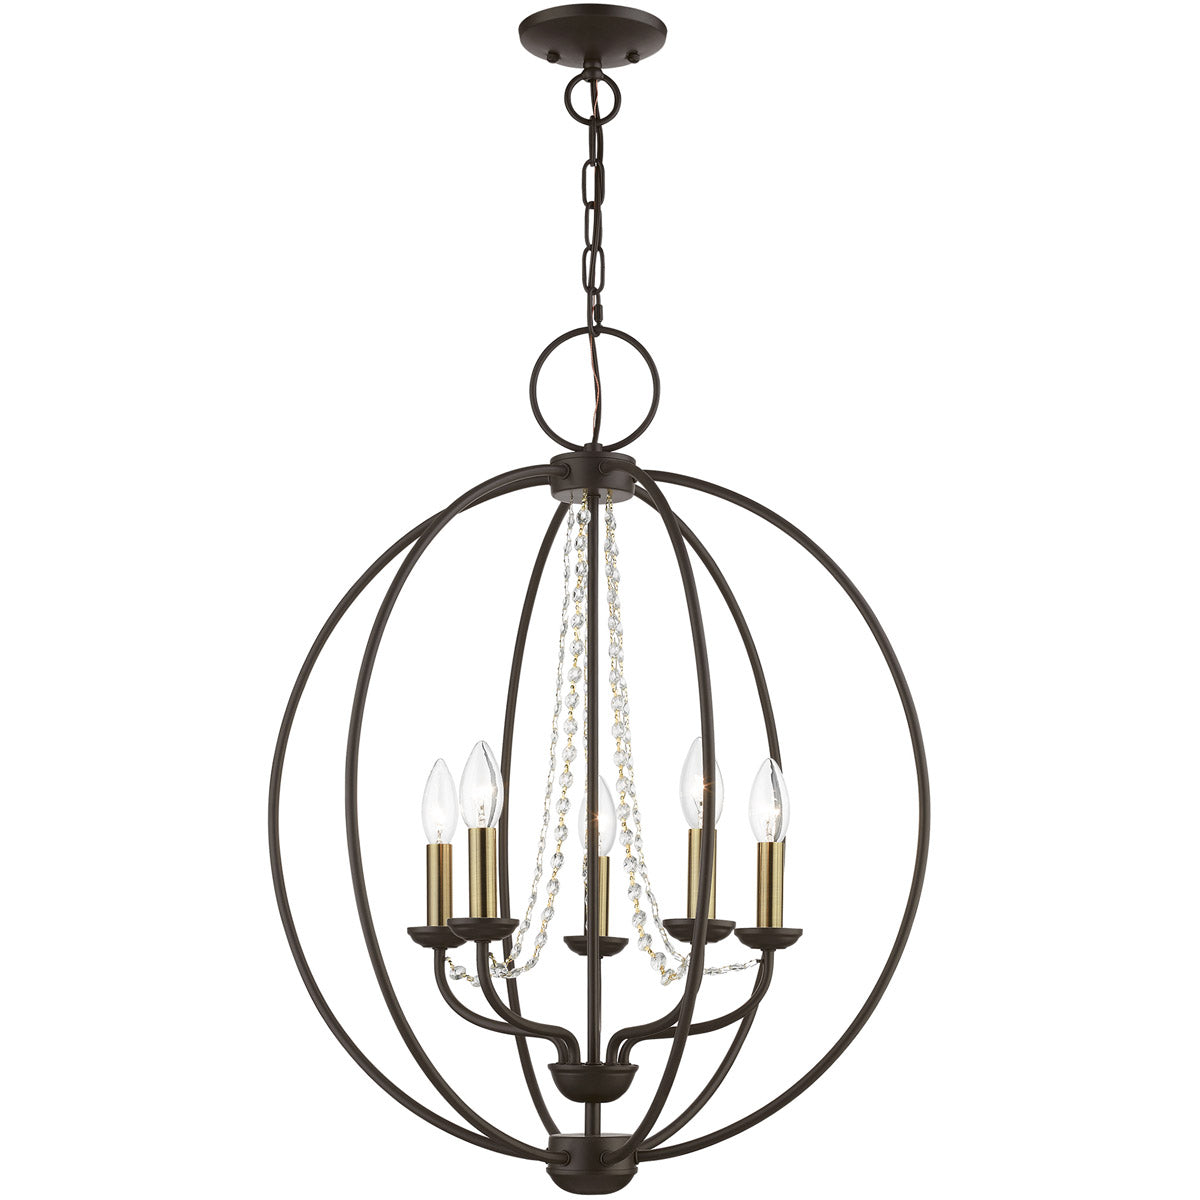 Arabella 5 Light Candles Chandelier Ceiling Light, Globe-Livex Lighting-LIVEX-40915-04-ChandeliersBlack with Brushed Nickel Finish Candles-6-France and Son